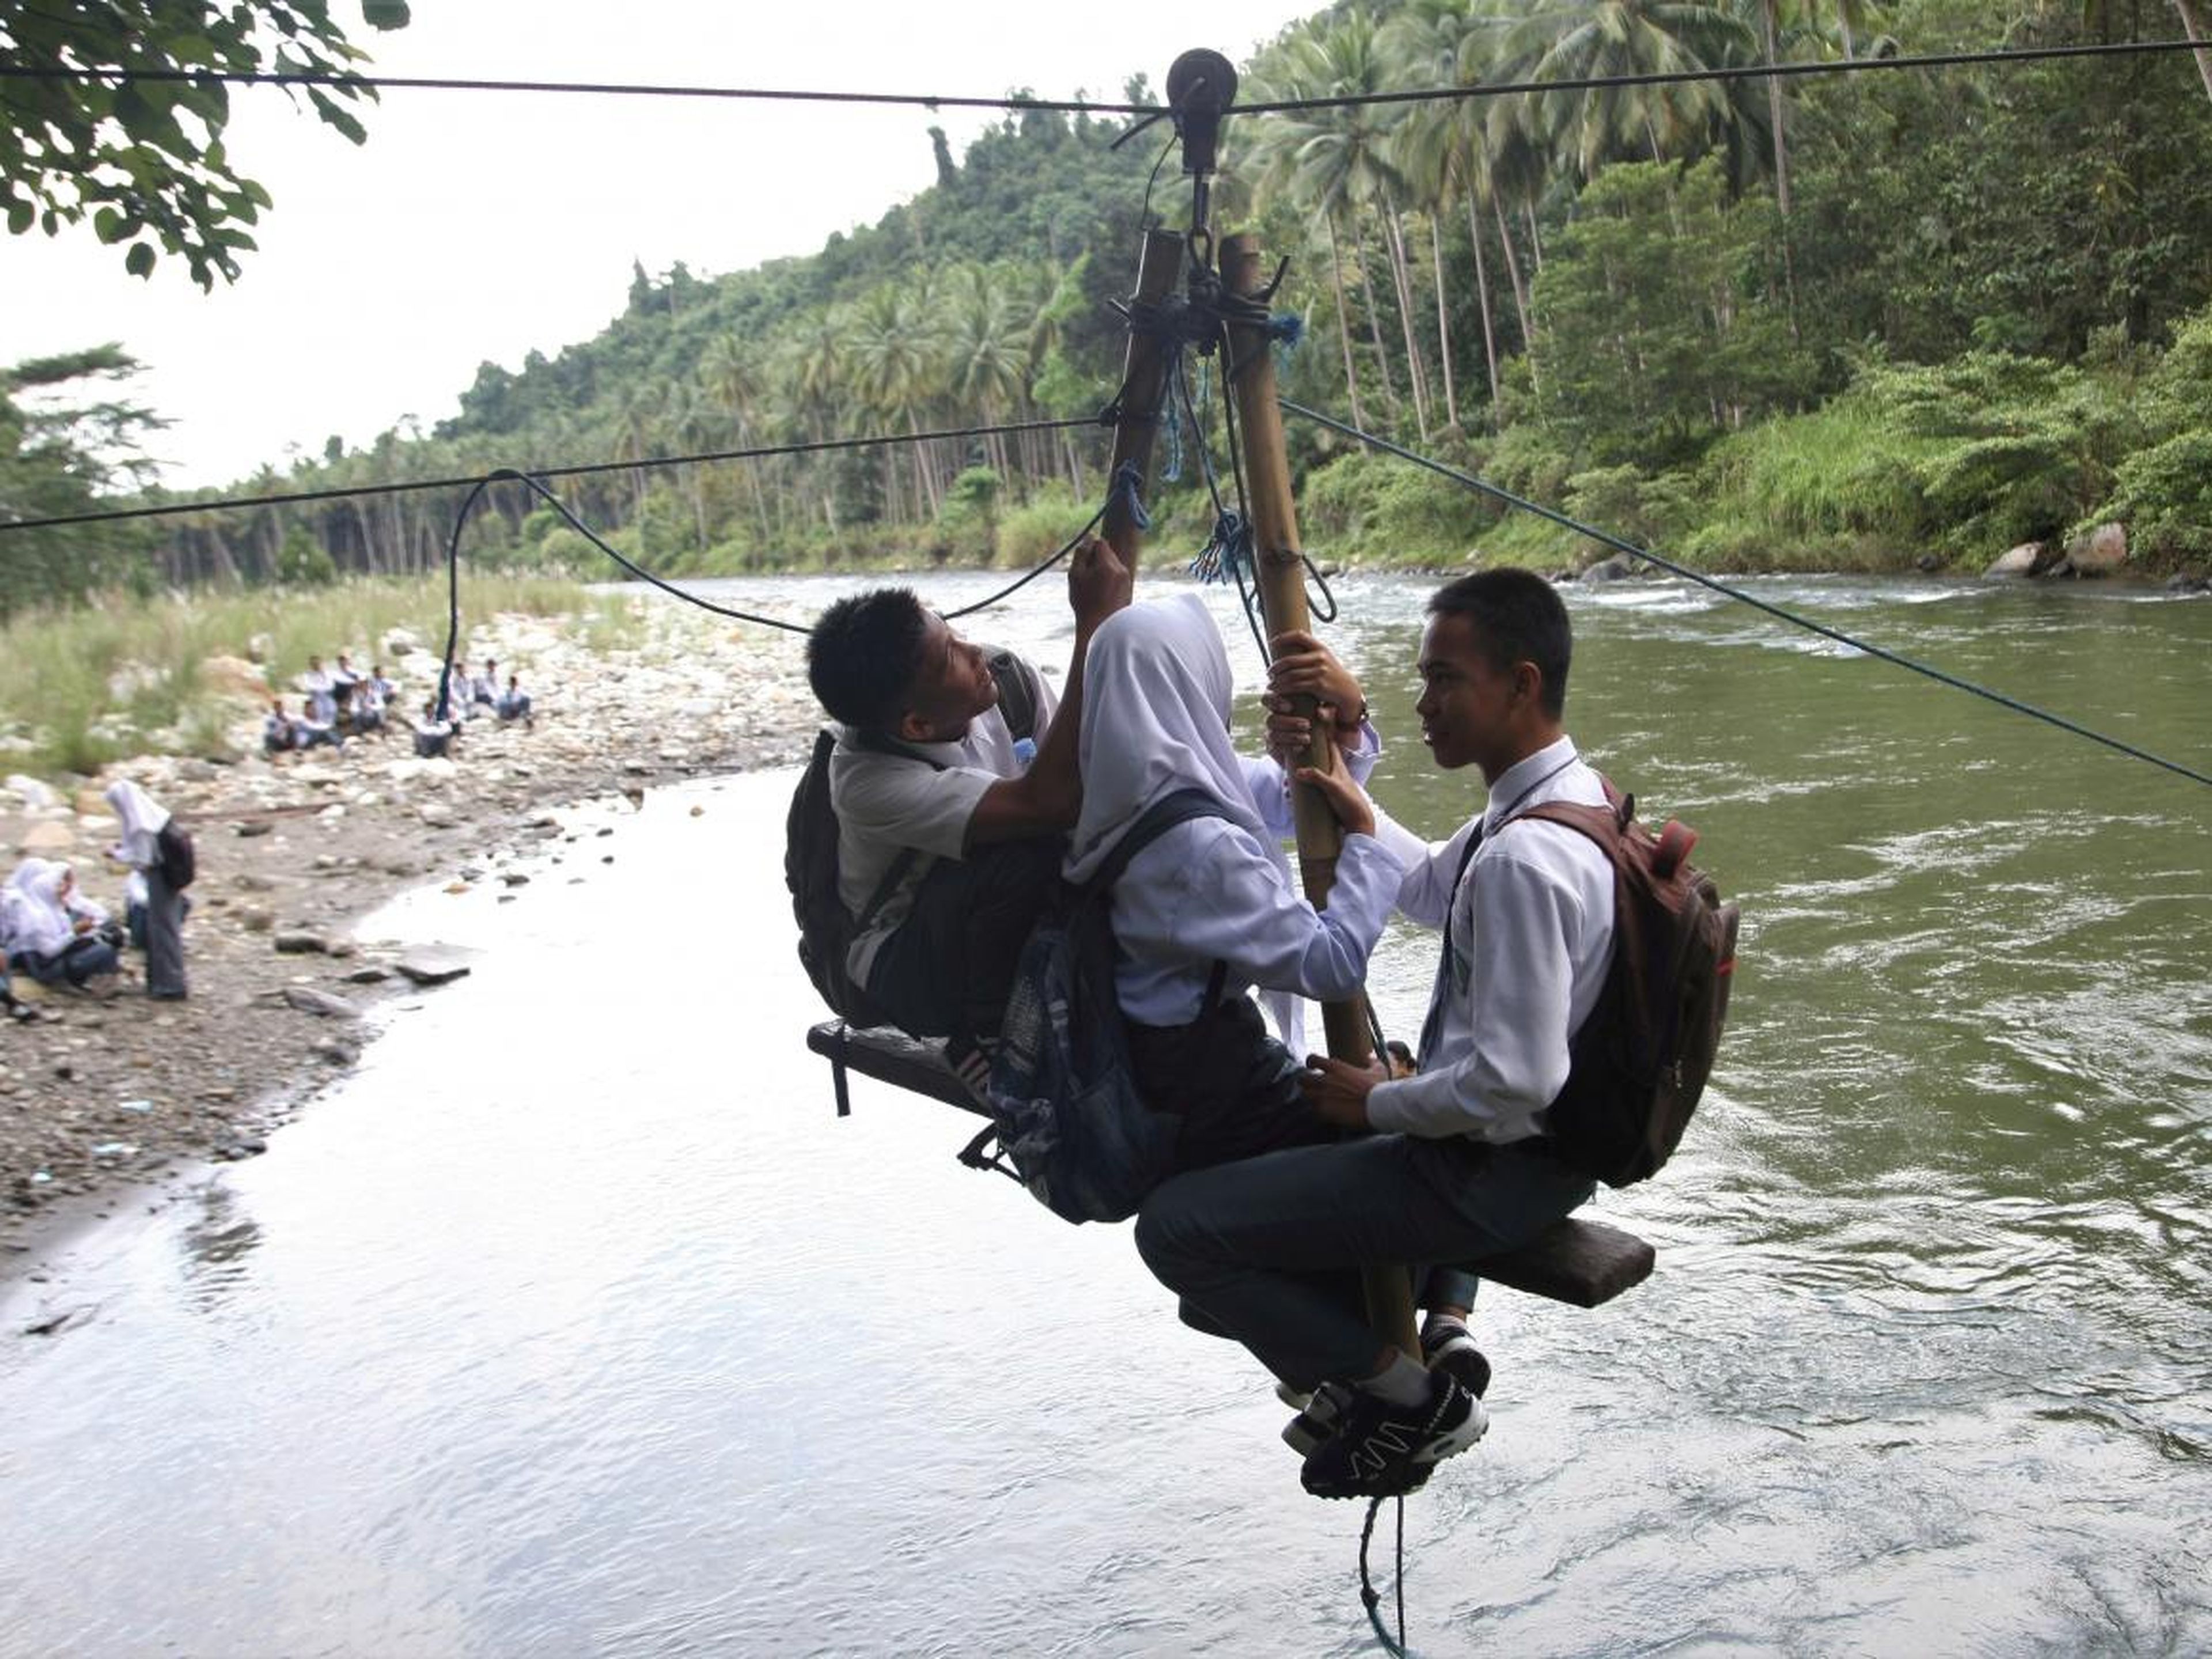 Sometimes the transportation is especially ingenious, like the seated zip line in the Indonesian town of Kolaka Utara. The seat can hold a maximum of four people.